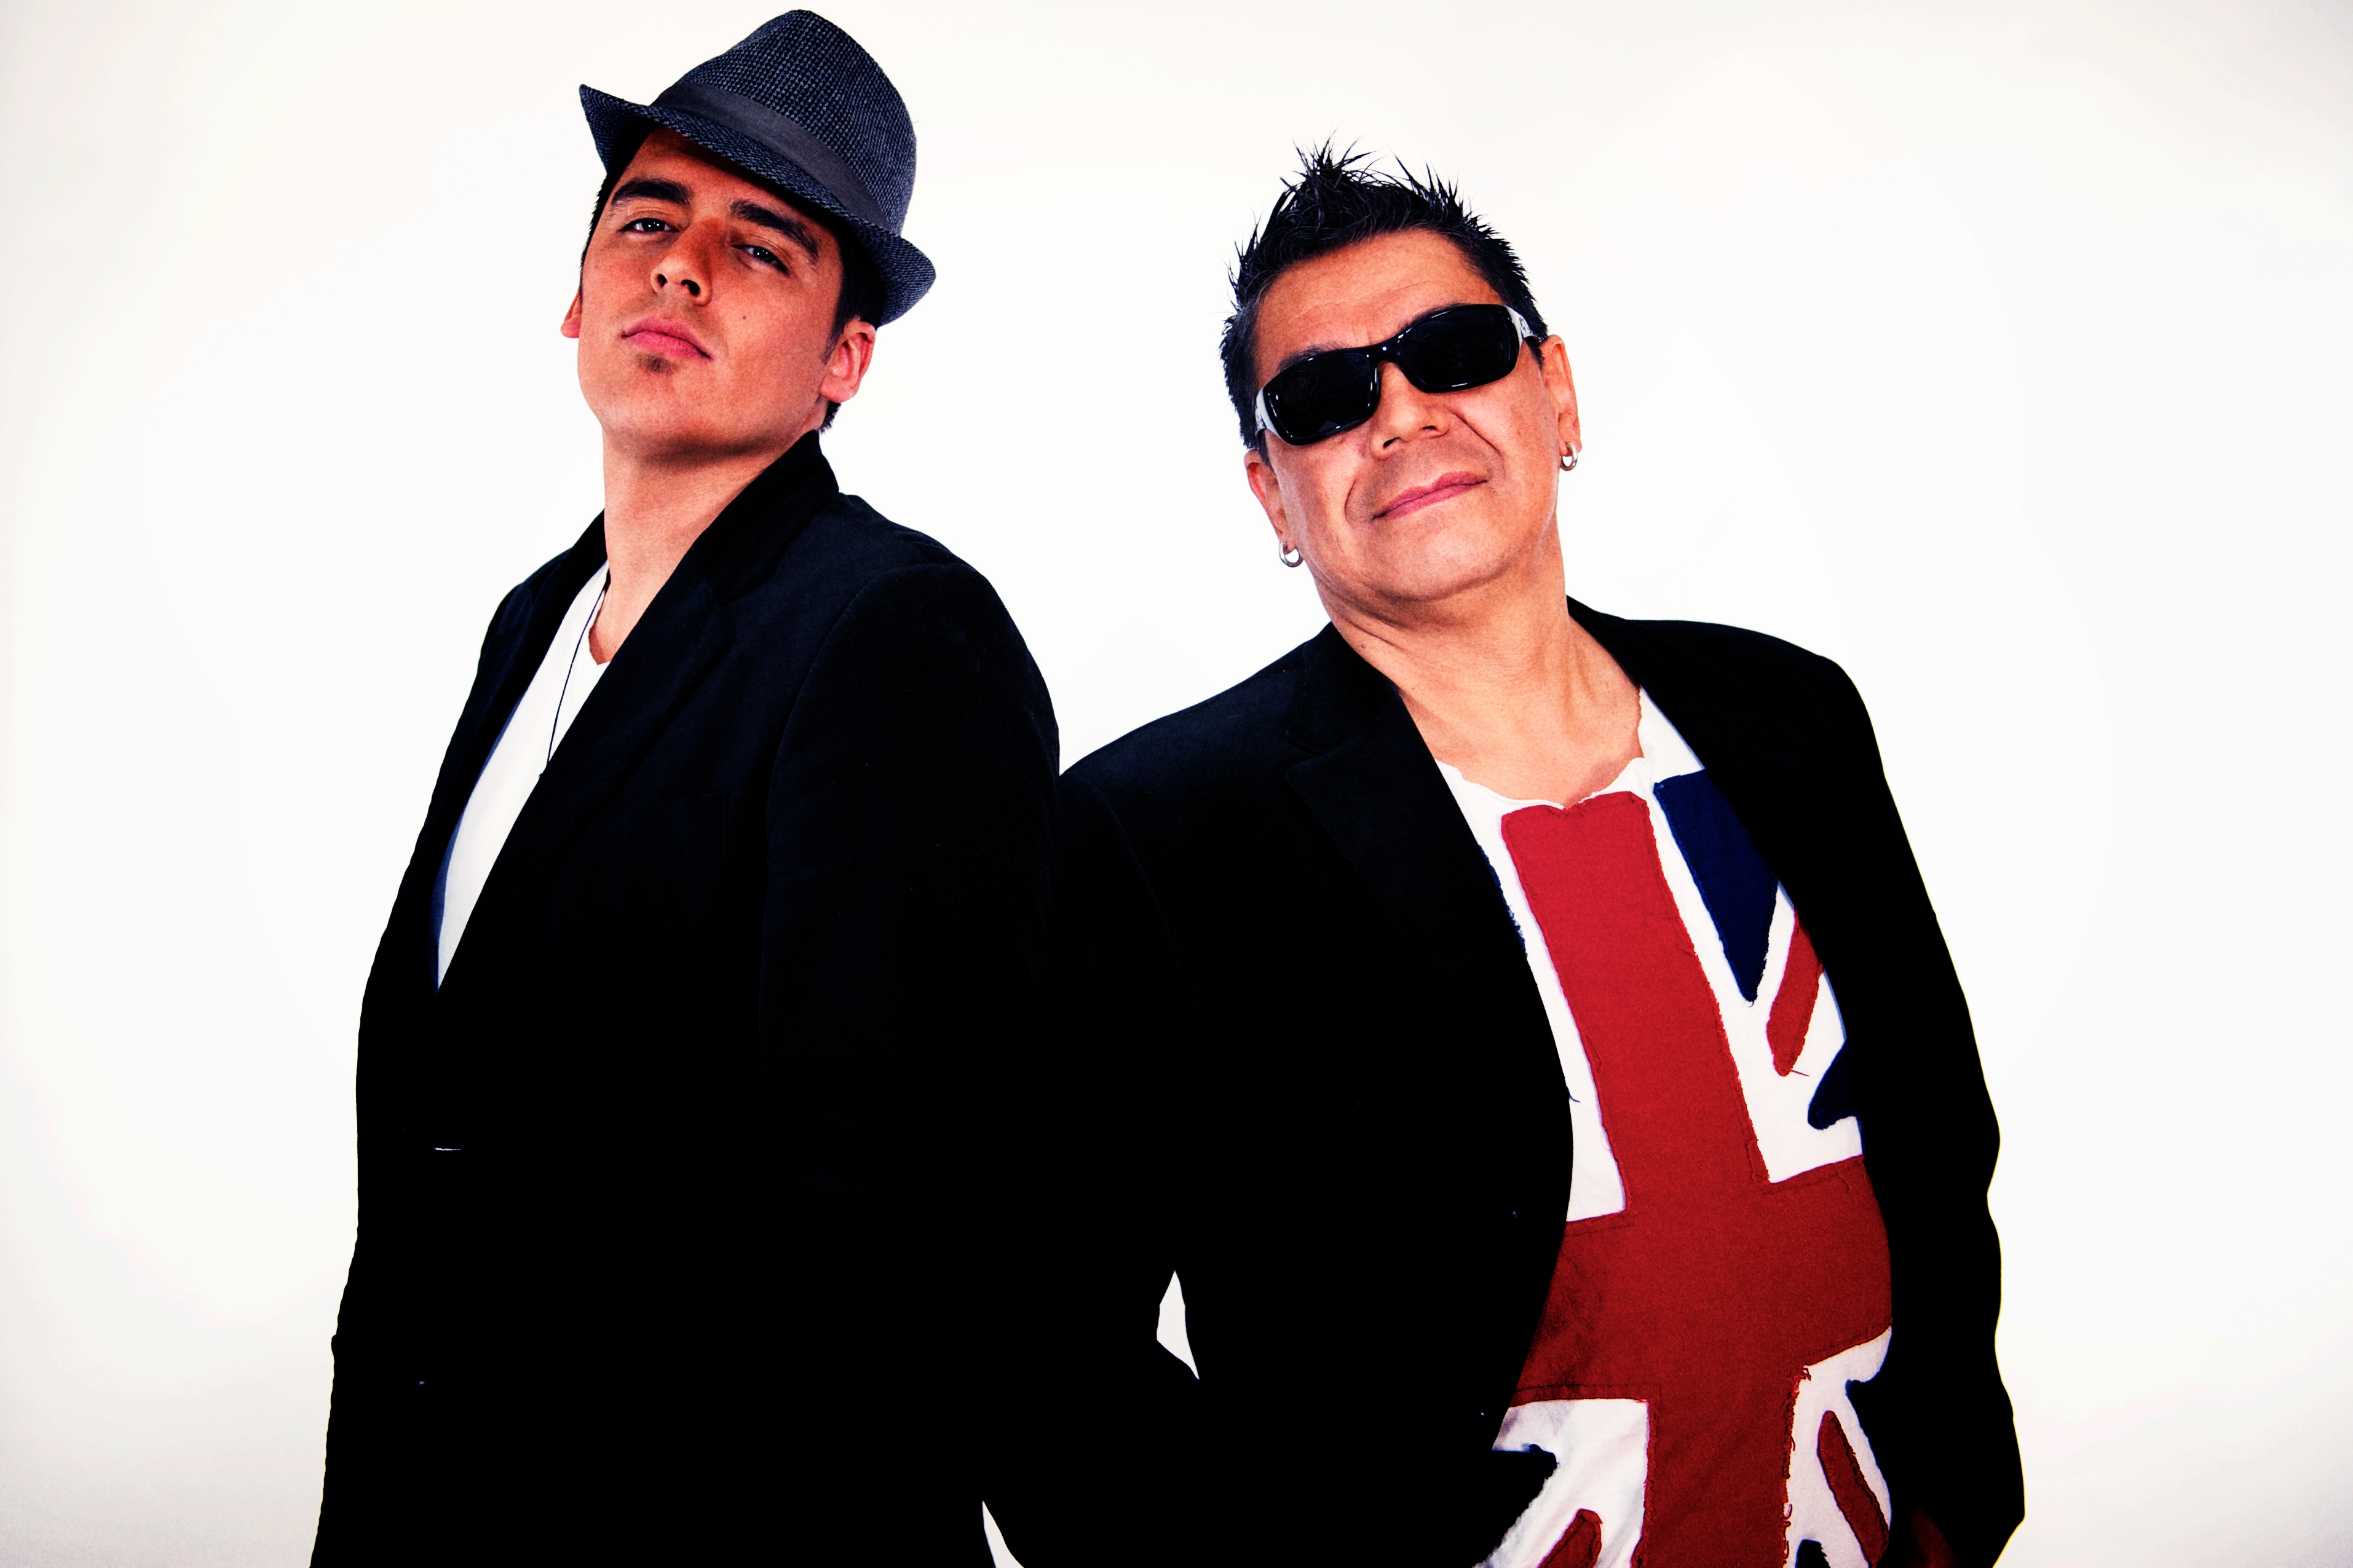 Lorne Cardinal and co-host Kyle Nobess. Promo shots for the 2011 Aboriginal Peoples Choice Music Awards.